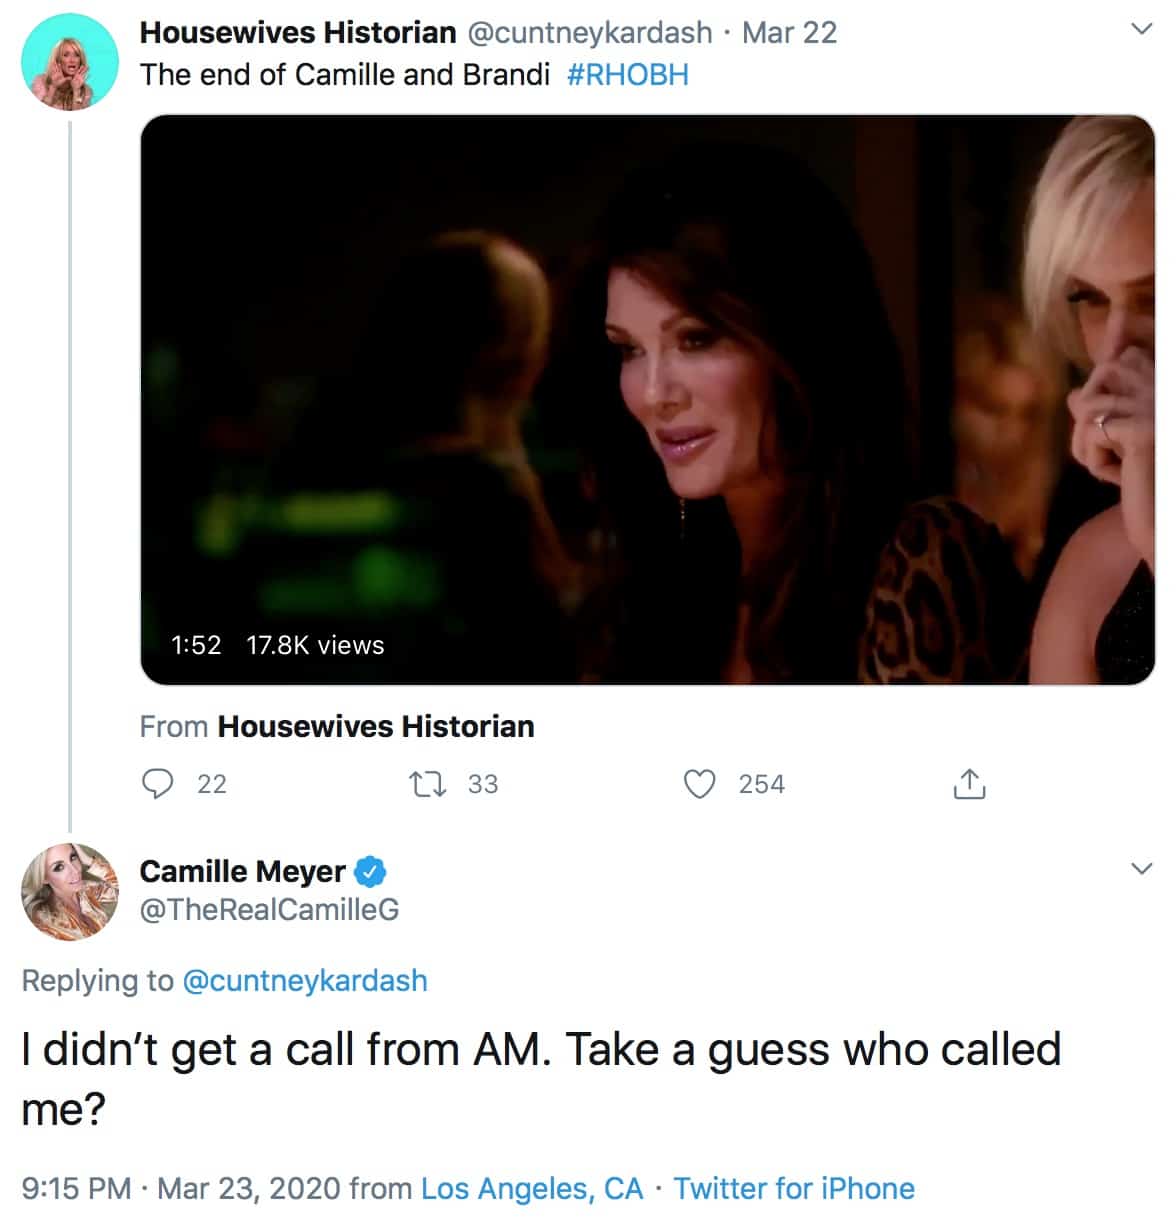 RHOBH Camille Grammer Got a Call From a Househusband About Lisa Vanderpump Take Down